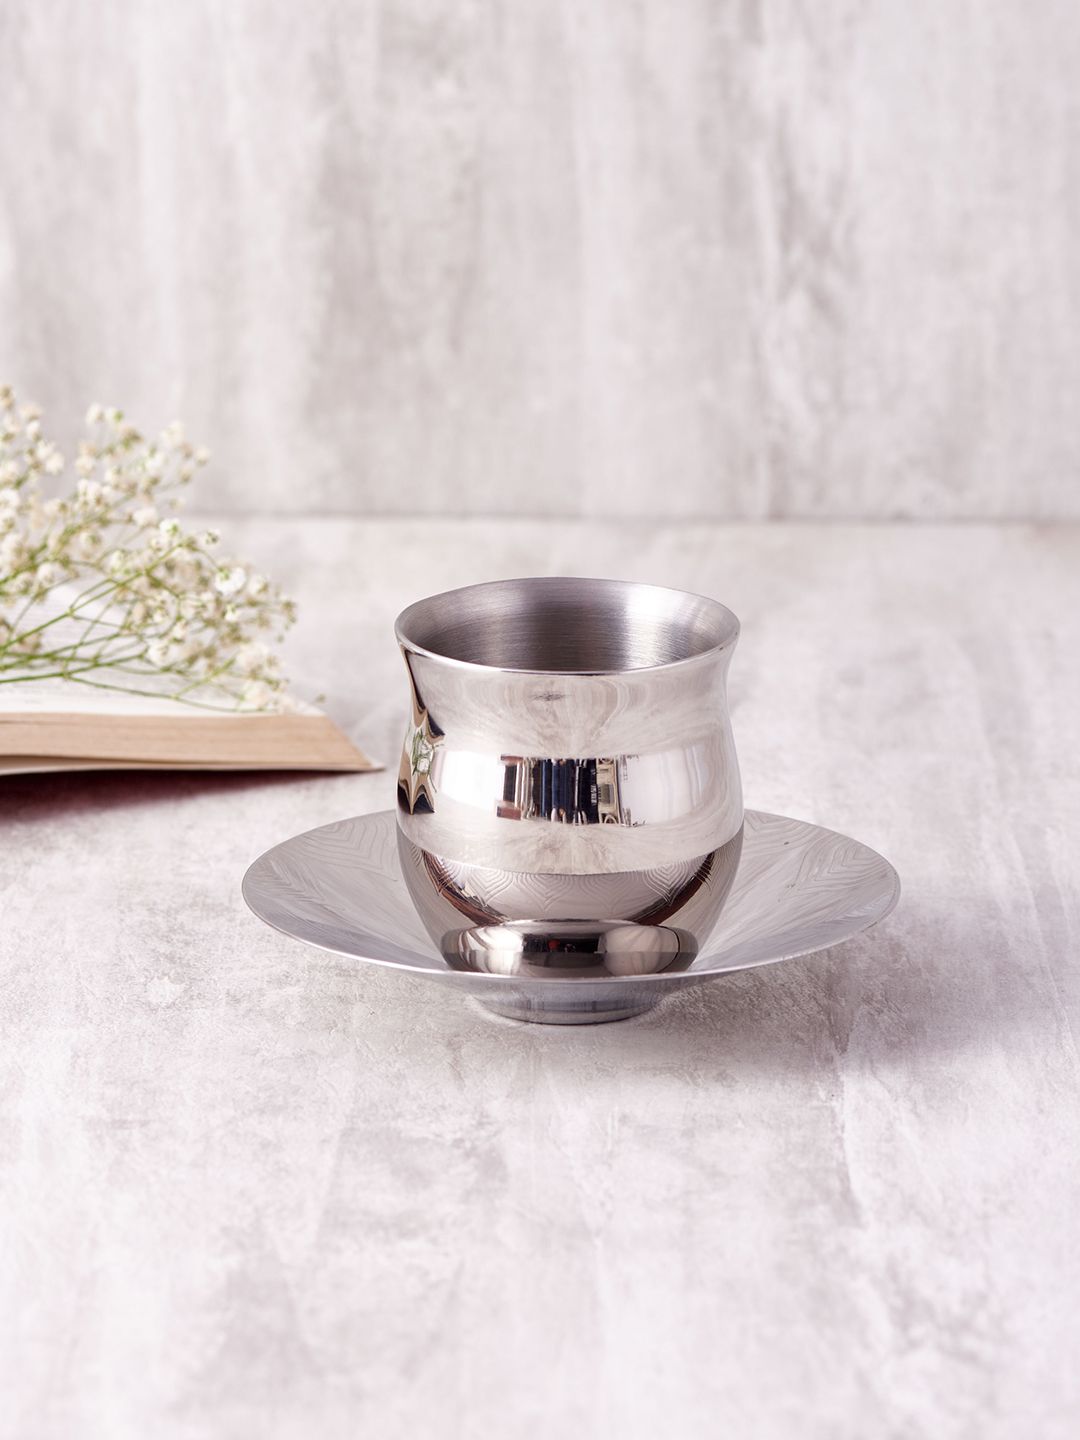 ARTTDINOX Silver-Toned Solid Stainless Steel Seamless Belly Tea Cup & Saucer Set Price in India